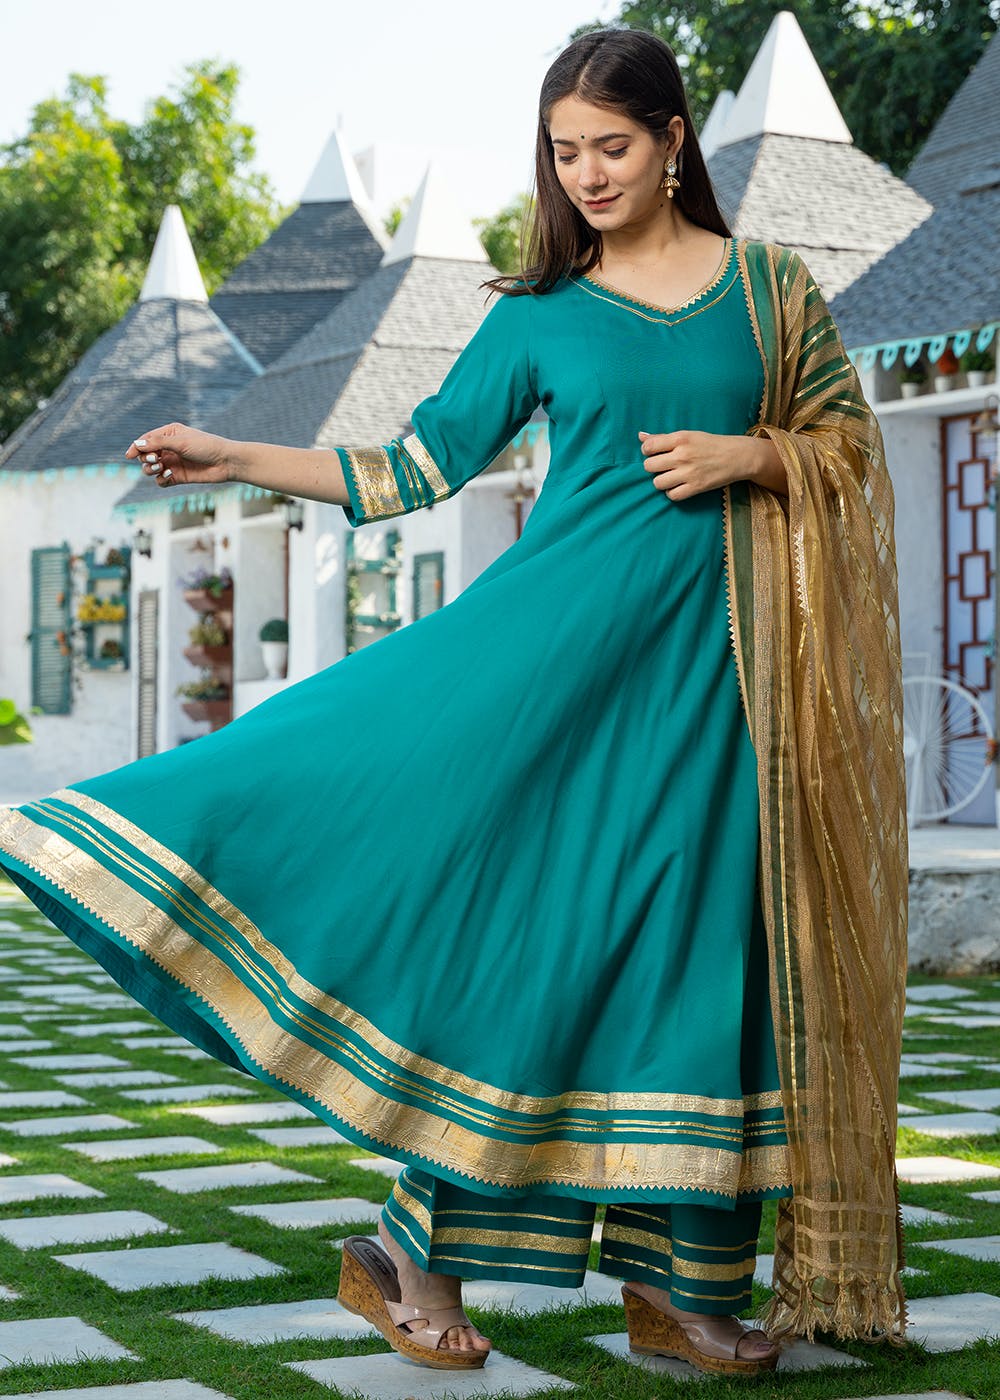 Gown : Rama green georgette gown with printed dupatta